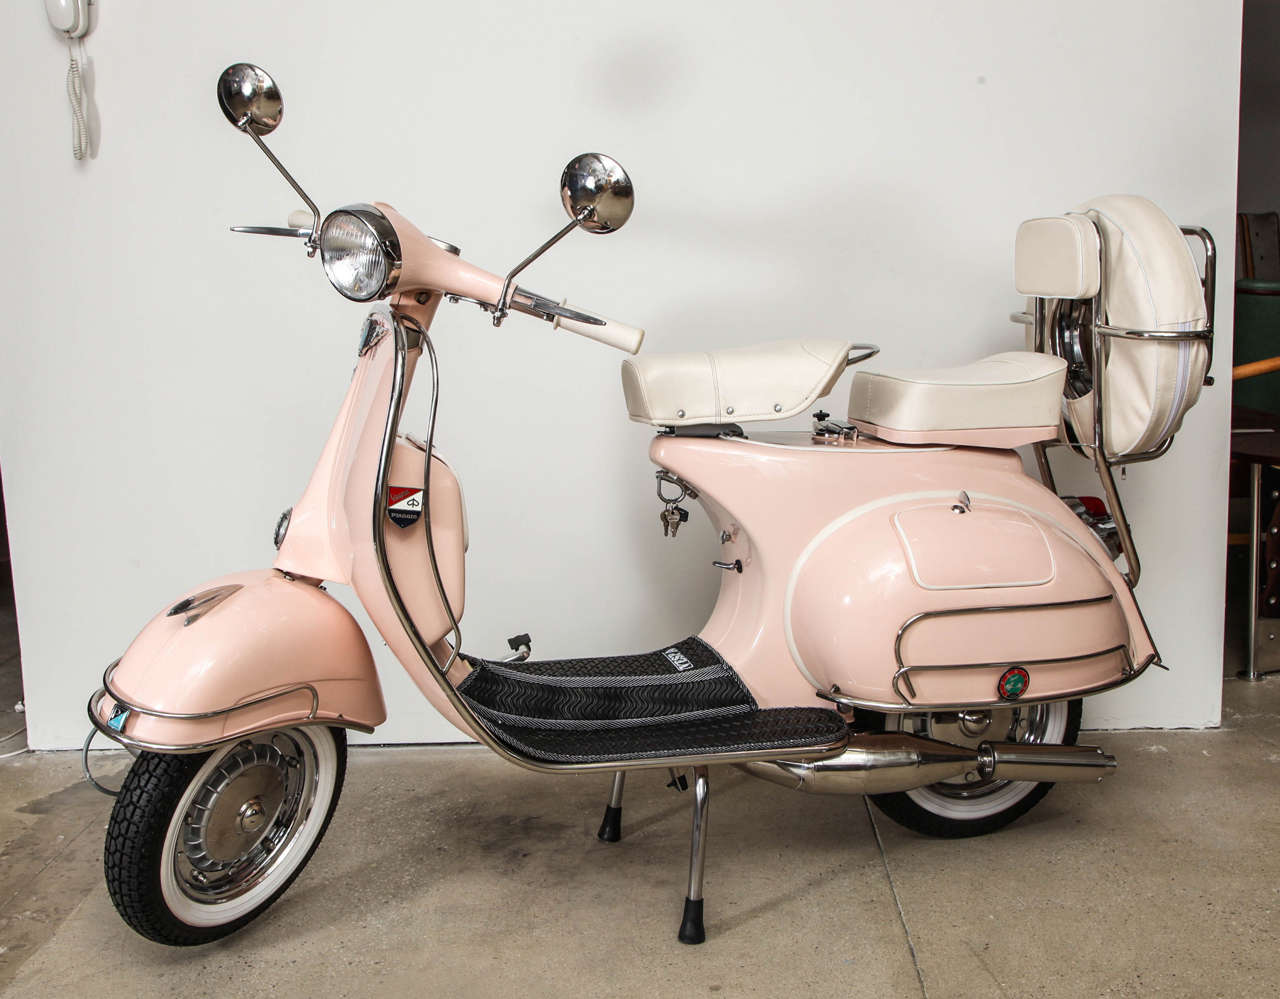 Meticulously restored 1963 vintage Italian, Piaggio Vespa VBB Standard 150cc in adobe light pink. Chassis No: VBB2T173553. This is an immaculately restored piece of history that is mechanically sound and reliable. Use it to run around town or as a